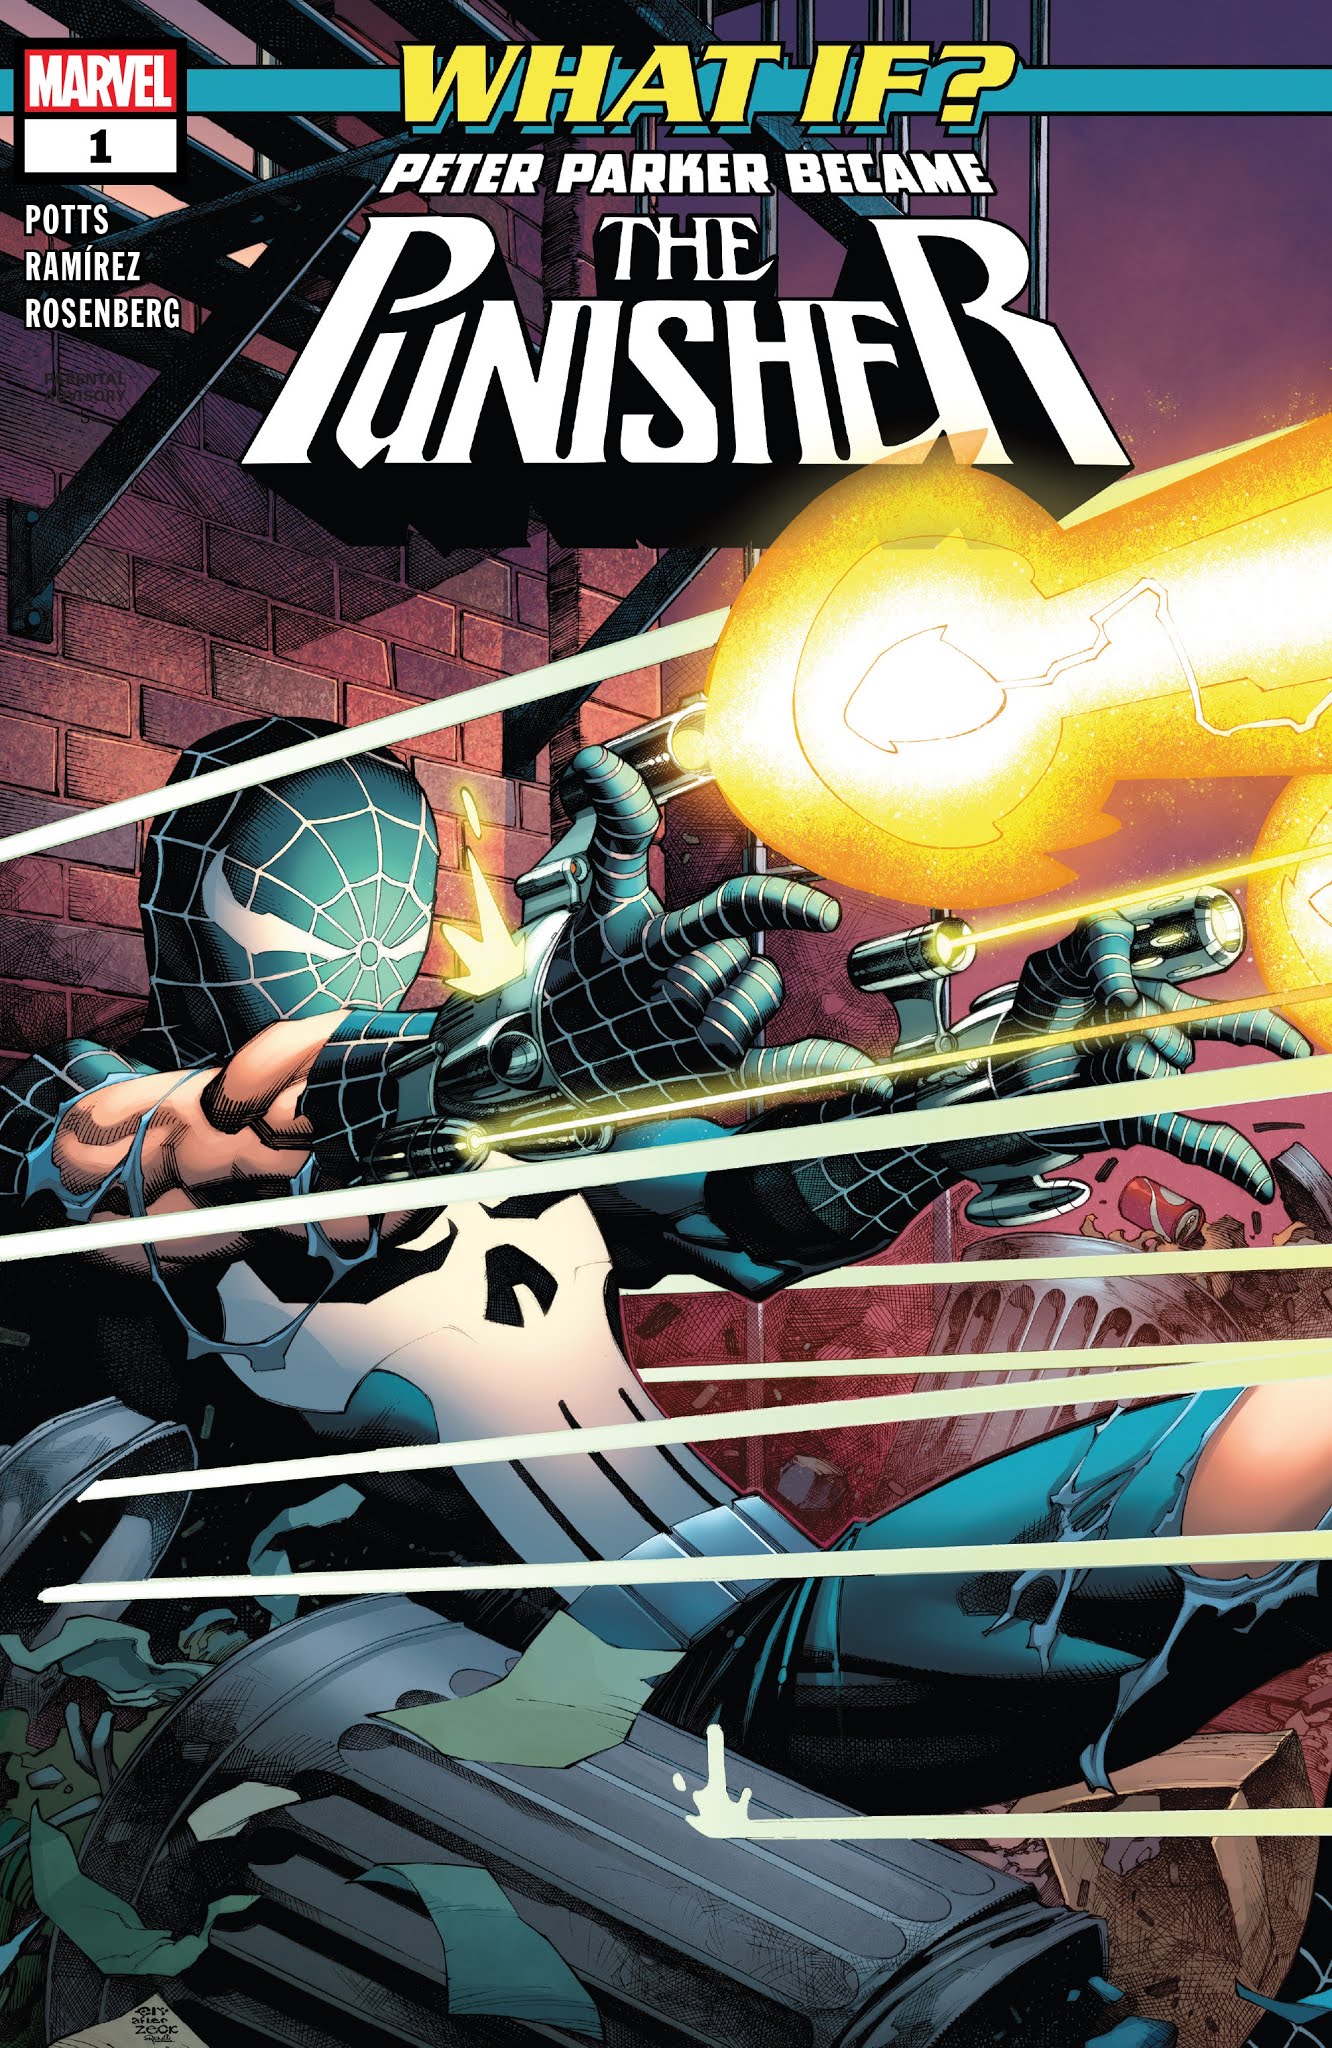 Read online What If? The Punisher comic -  Issue # Full - 1